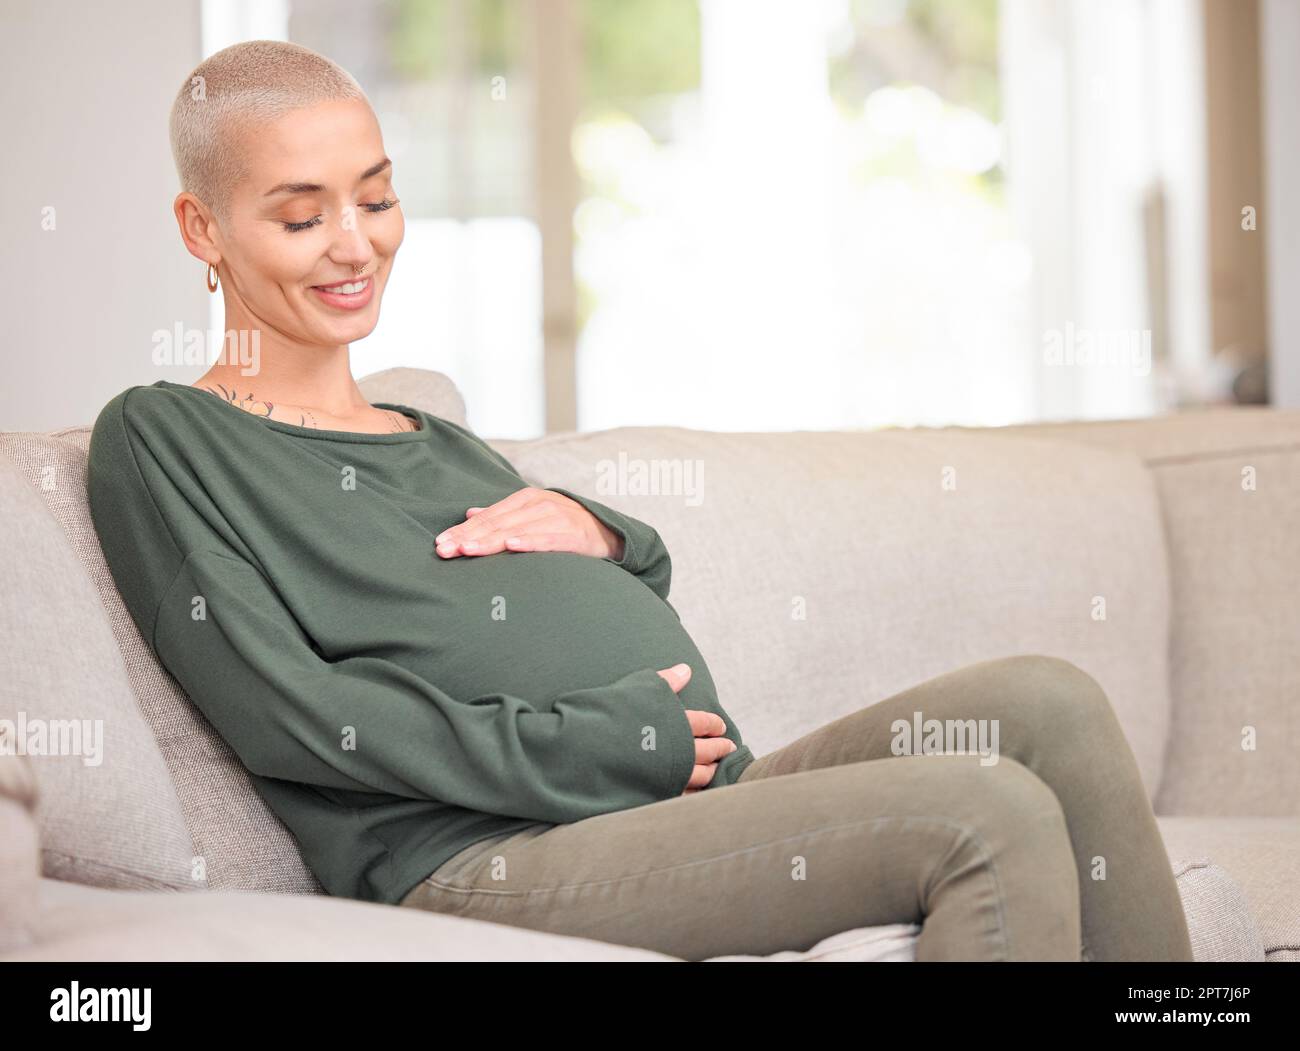 I Cant Wait To Meet You An Attractive Young Pregnant Woman Rubbing Her Belly While Sitting On 